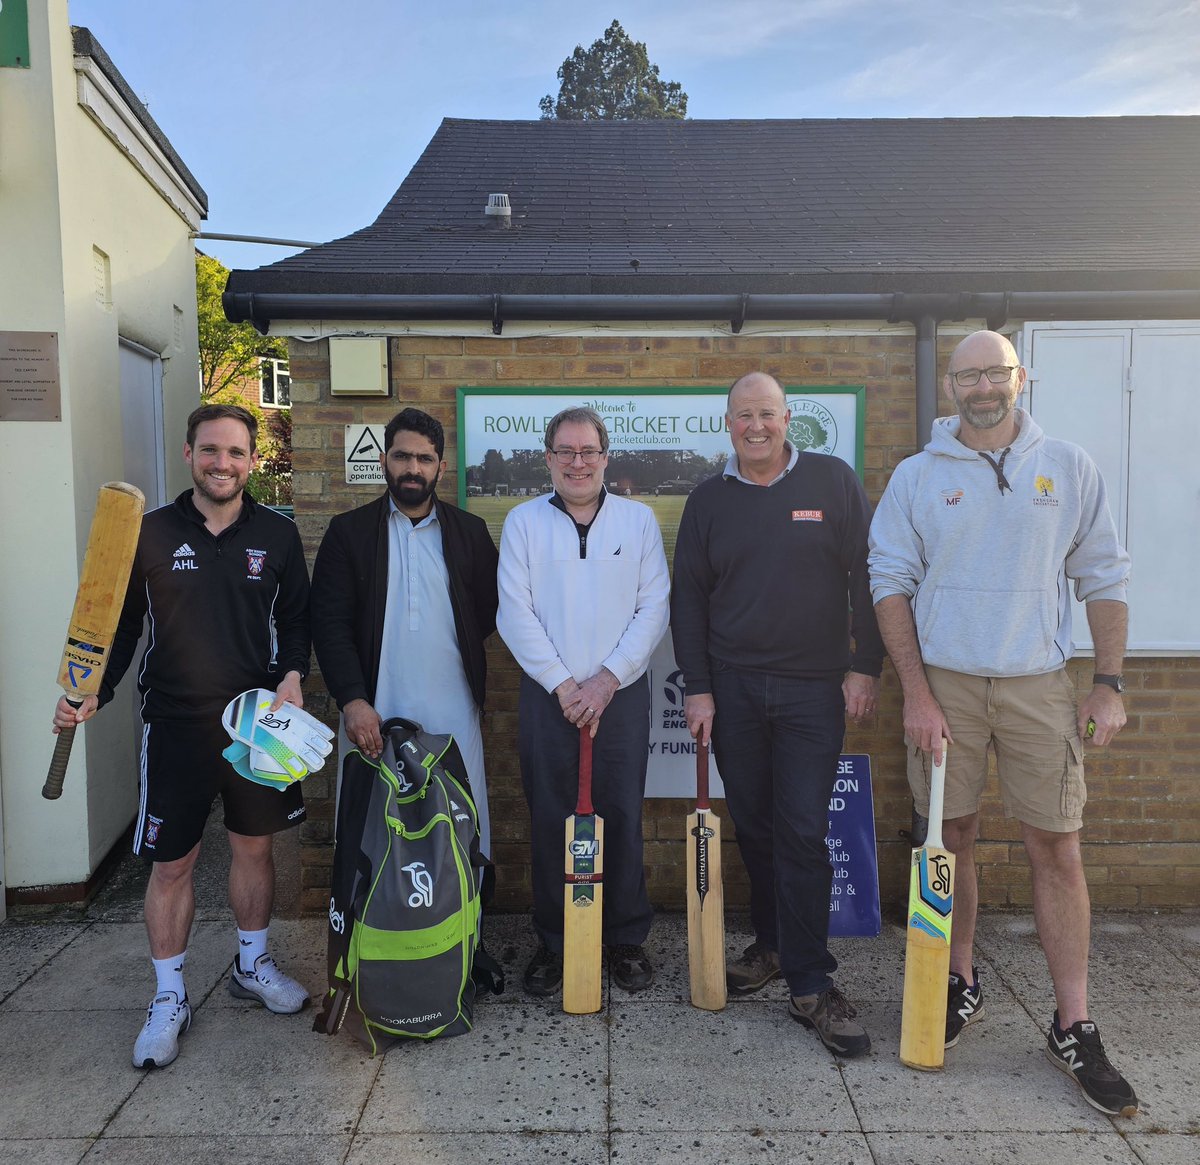 Cricket gear distributed to Ash Manor School & Gul (an Afghan refugee) from the 170 items of cricket gear donated to @RowledgeCC & @FrenshamCC through the Cricket Gear Reuse project organised by @UCAROffice supported by @surreycricket @SurreyCricketFd @flintoff11